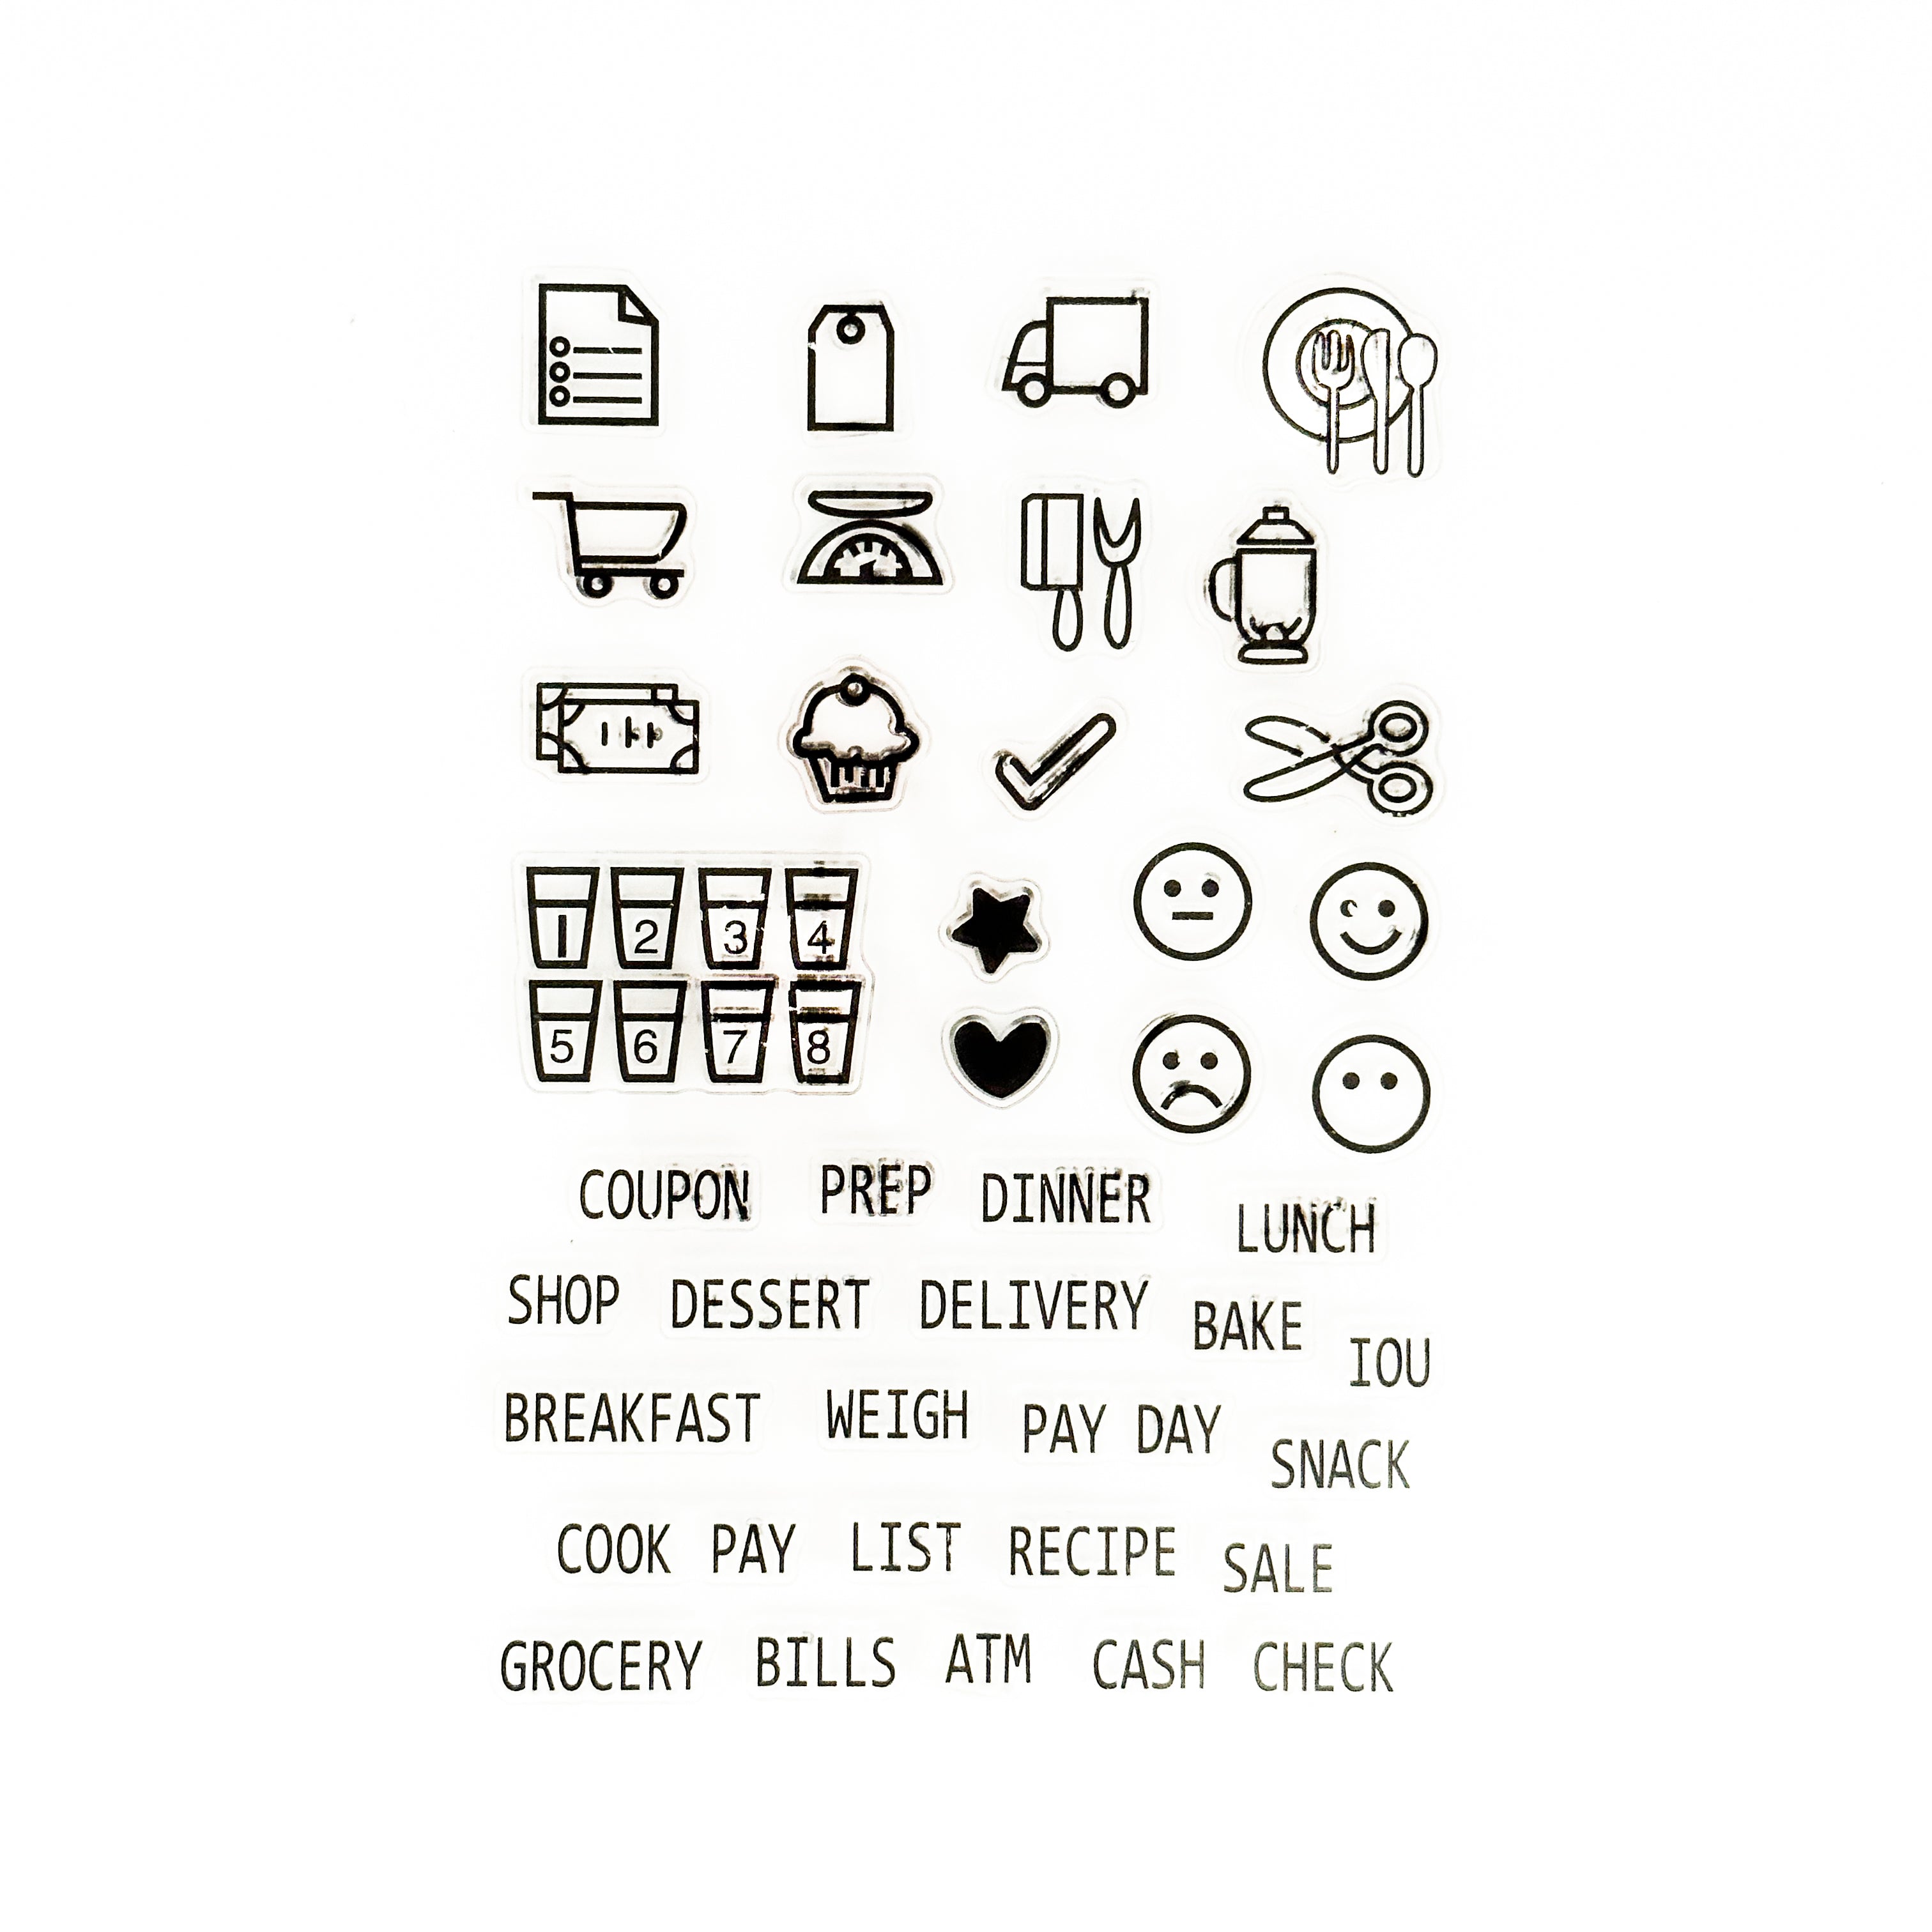 Blog, Social Media, and Business Icons Planner Stamps